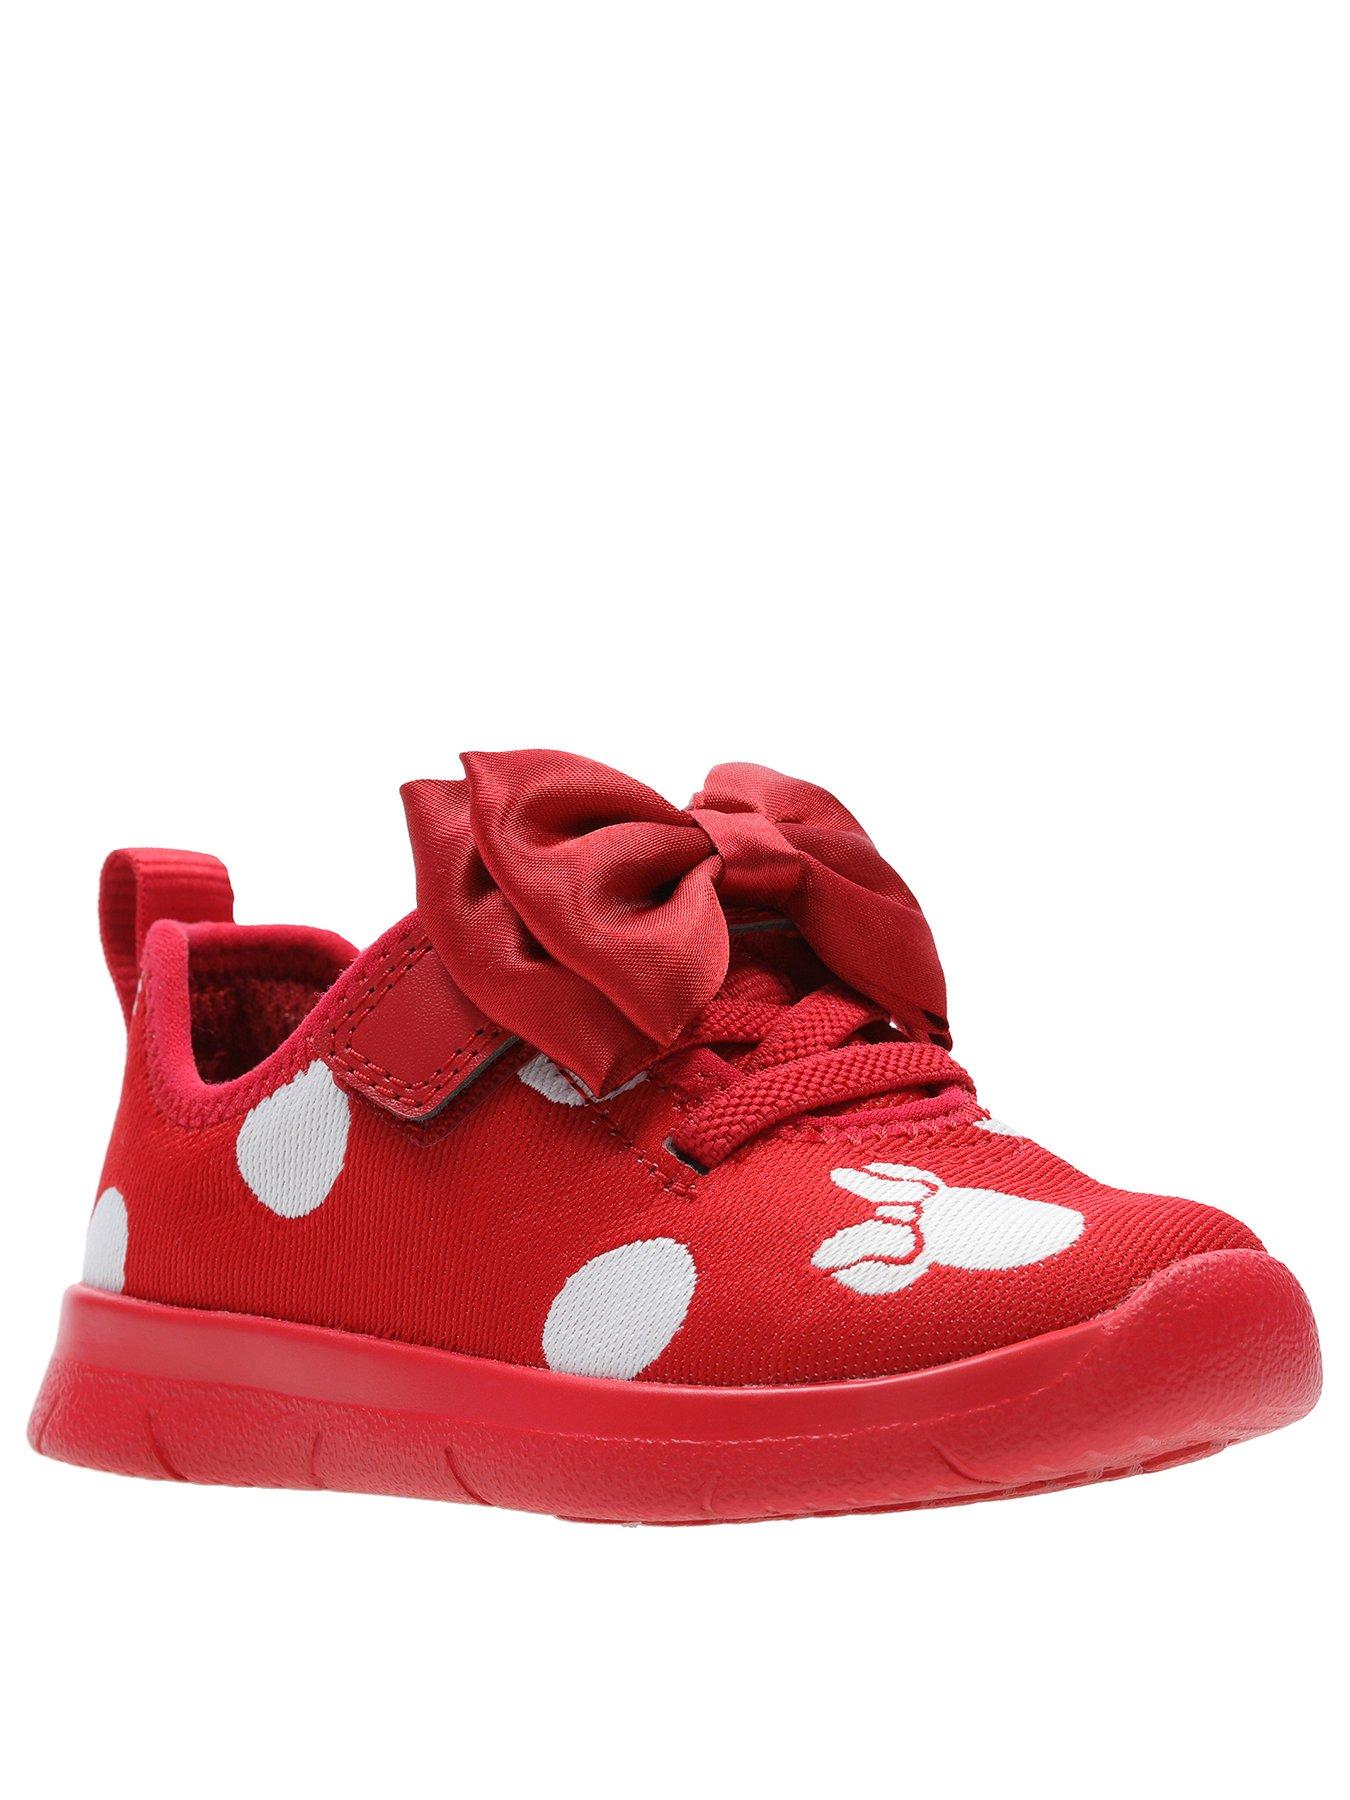 clarks minnie mouse toddler bow trainer